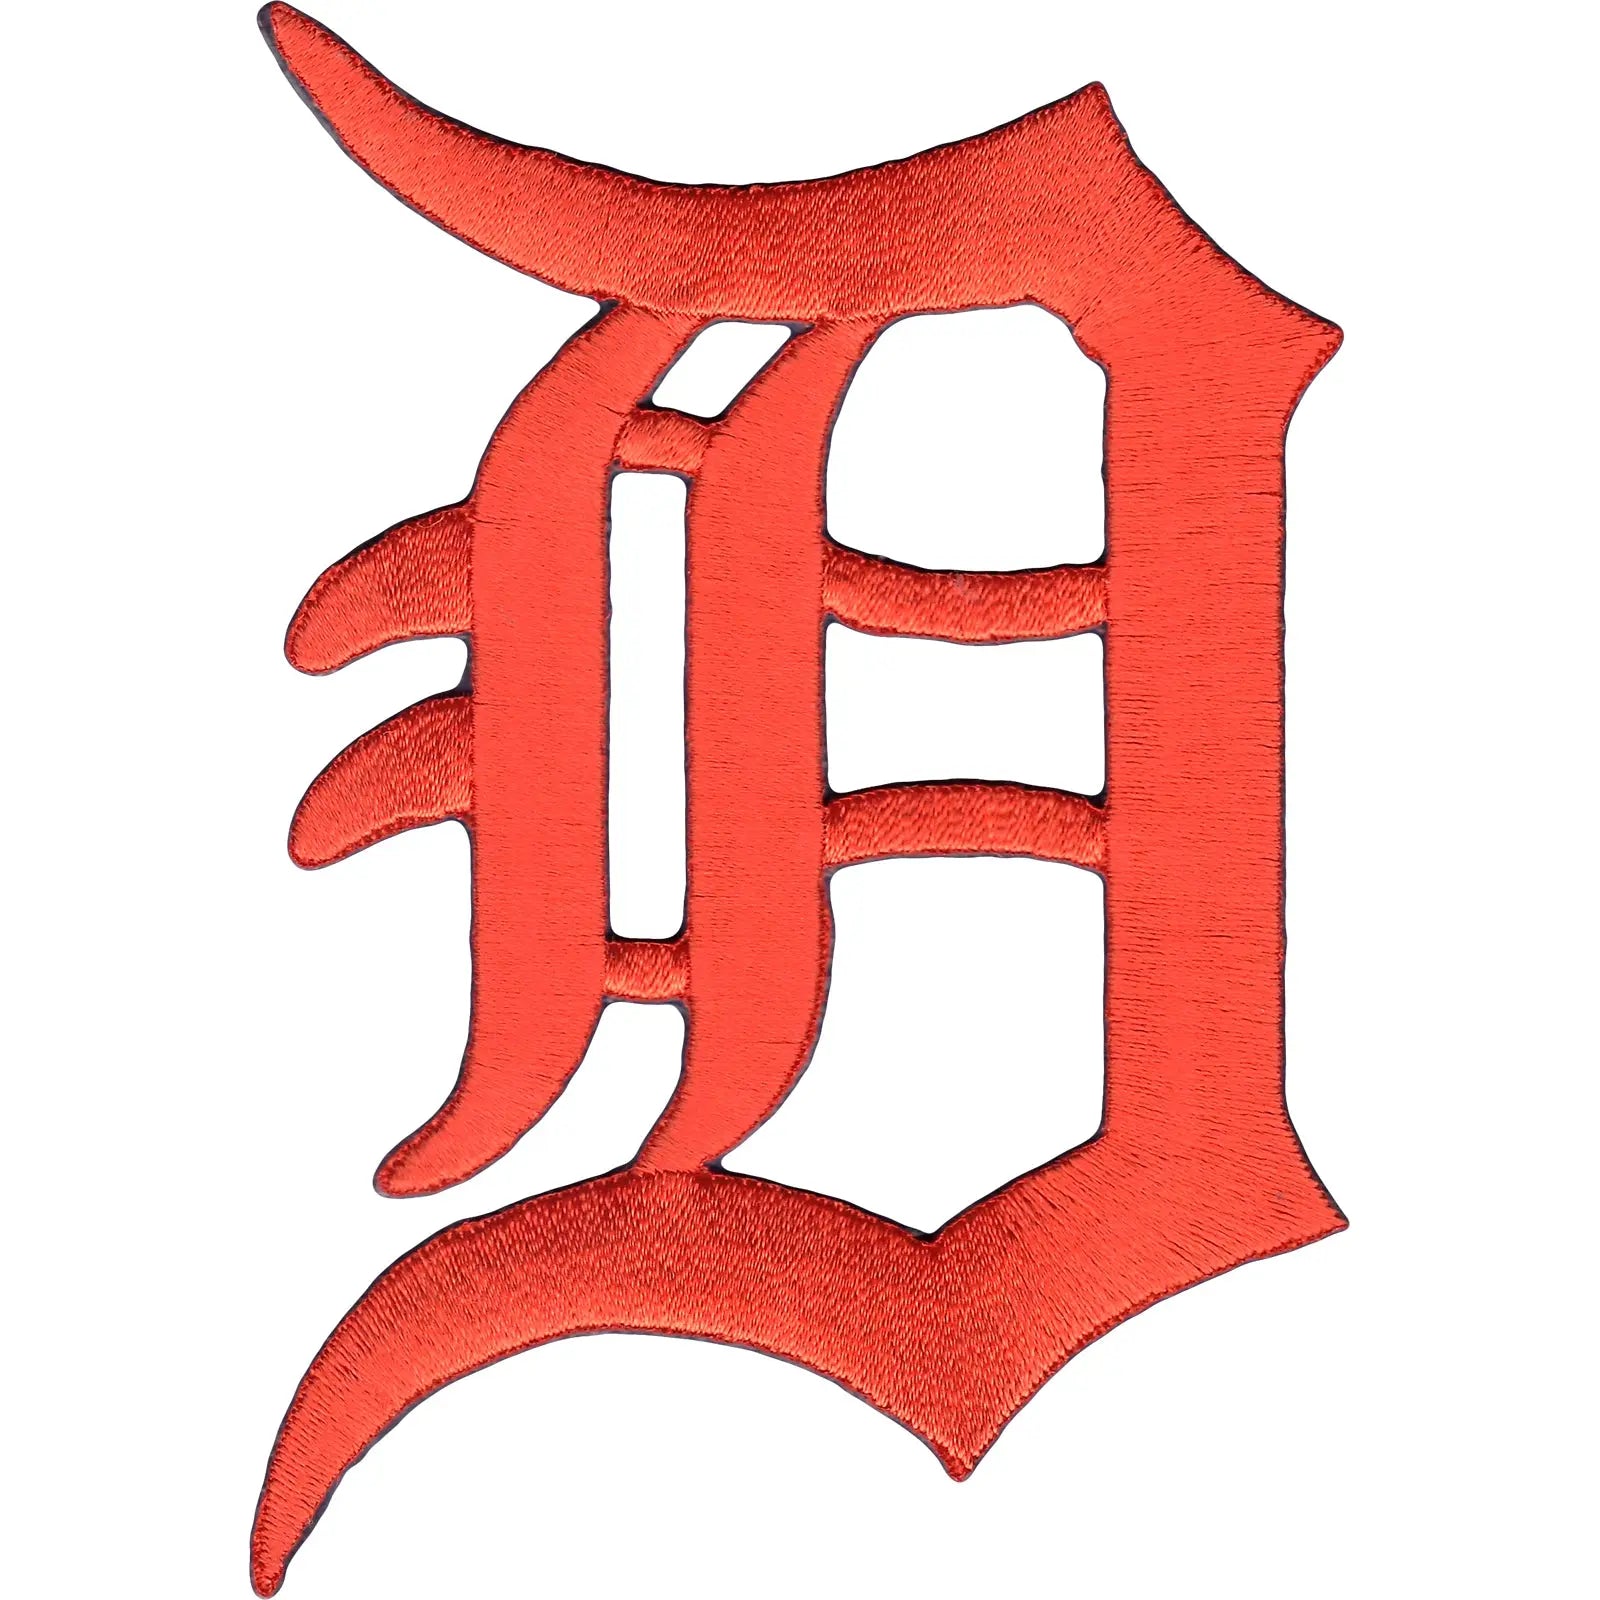 Detroit Tigers, Red Wings, Pistons & Lions Apparel - Free shipping